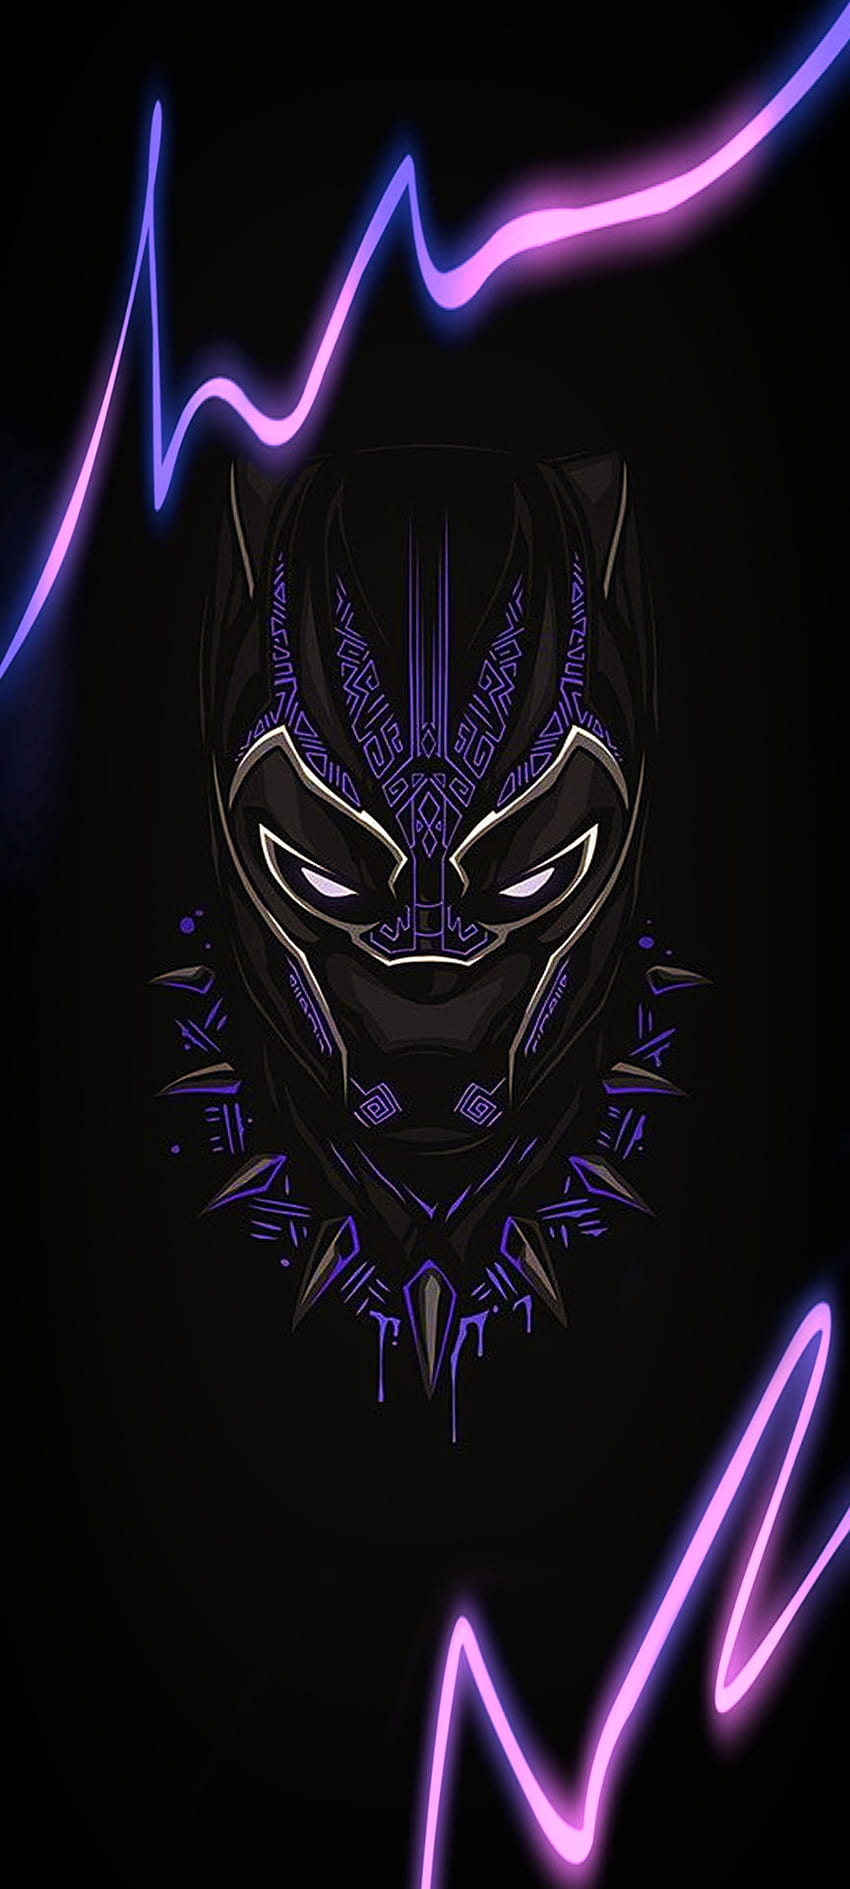 100+] Black Panther Superhero Pictures | Wallpapers.com